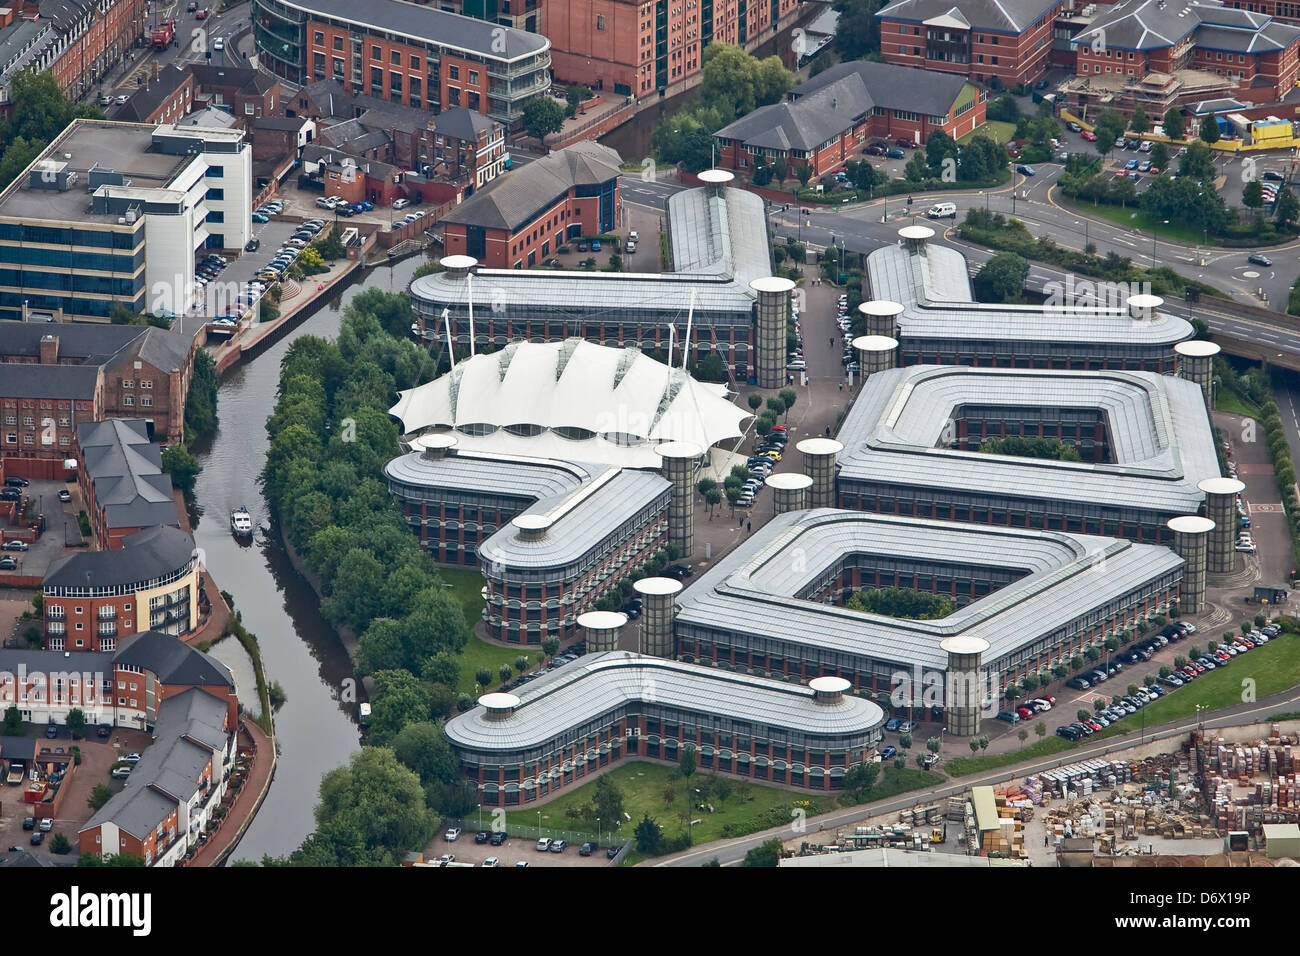 Aerial image of the HMRC tax office in Nottingham Stock Photo 55890850